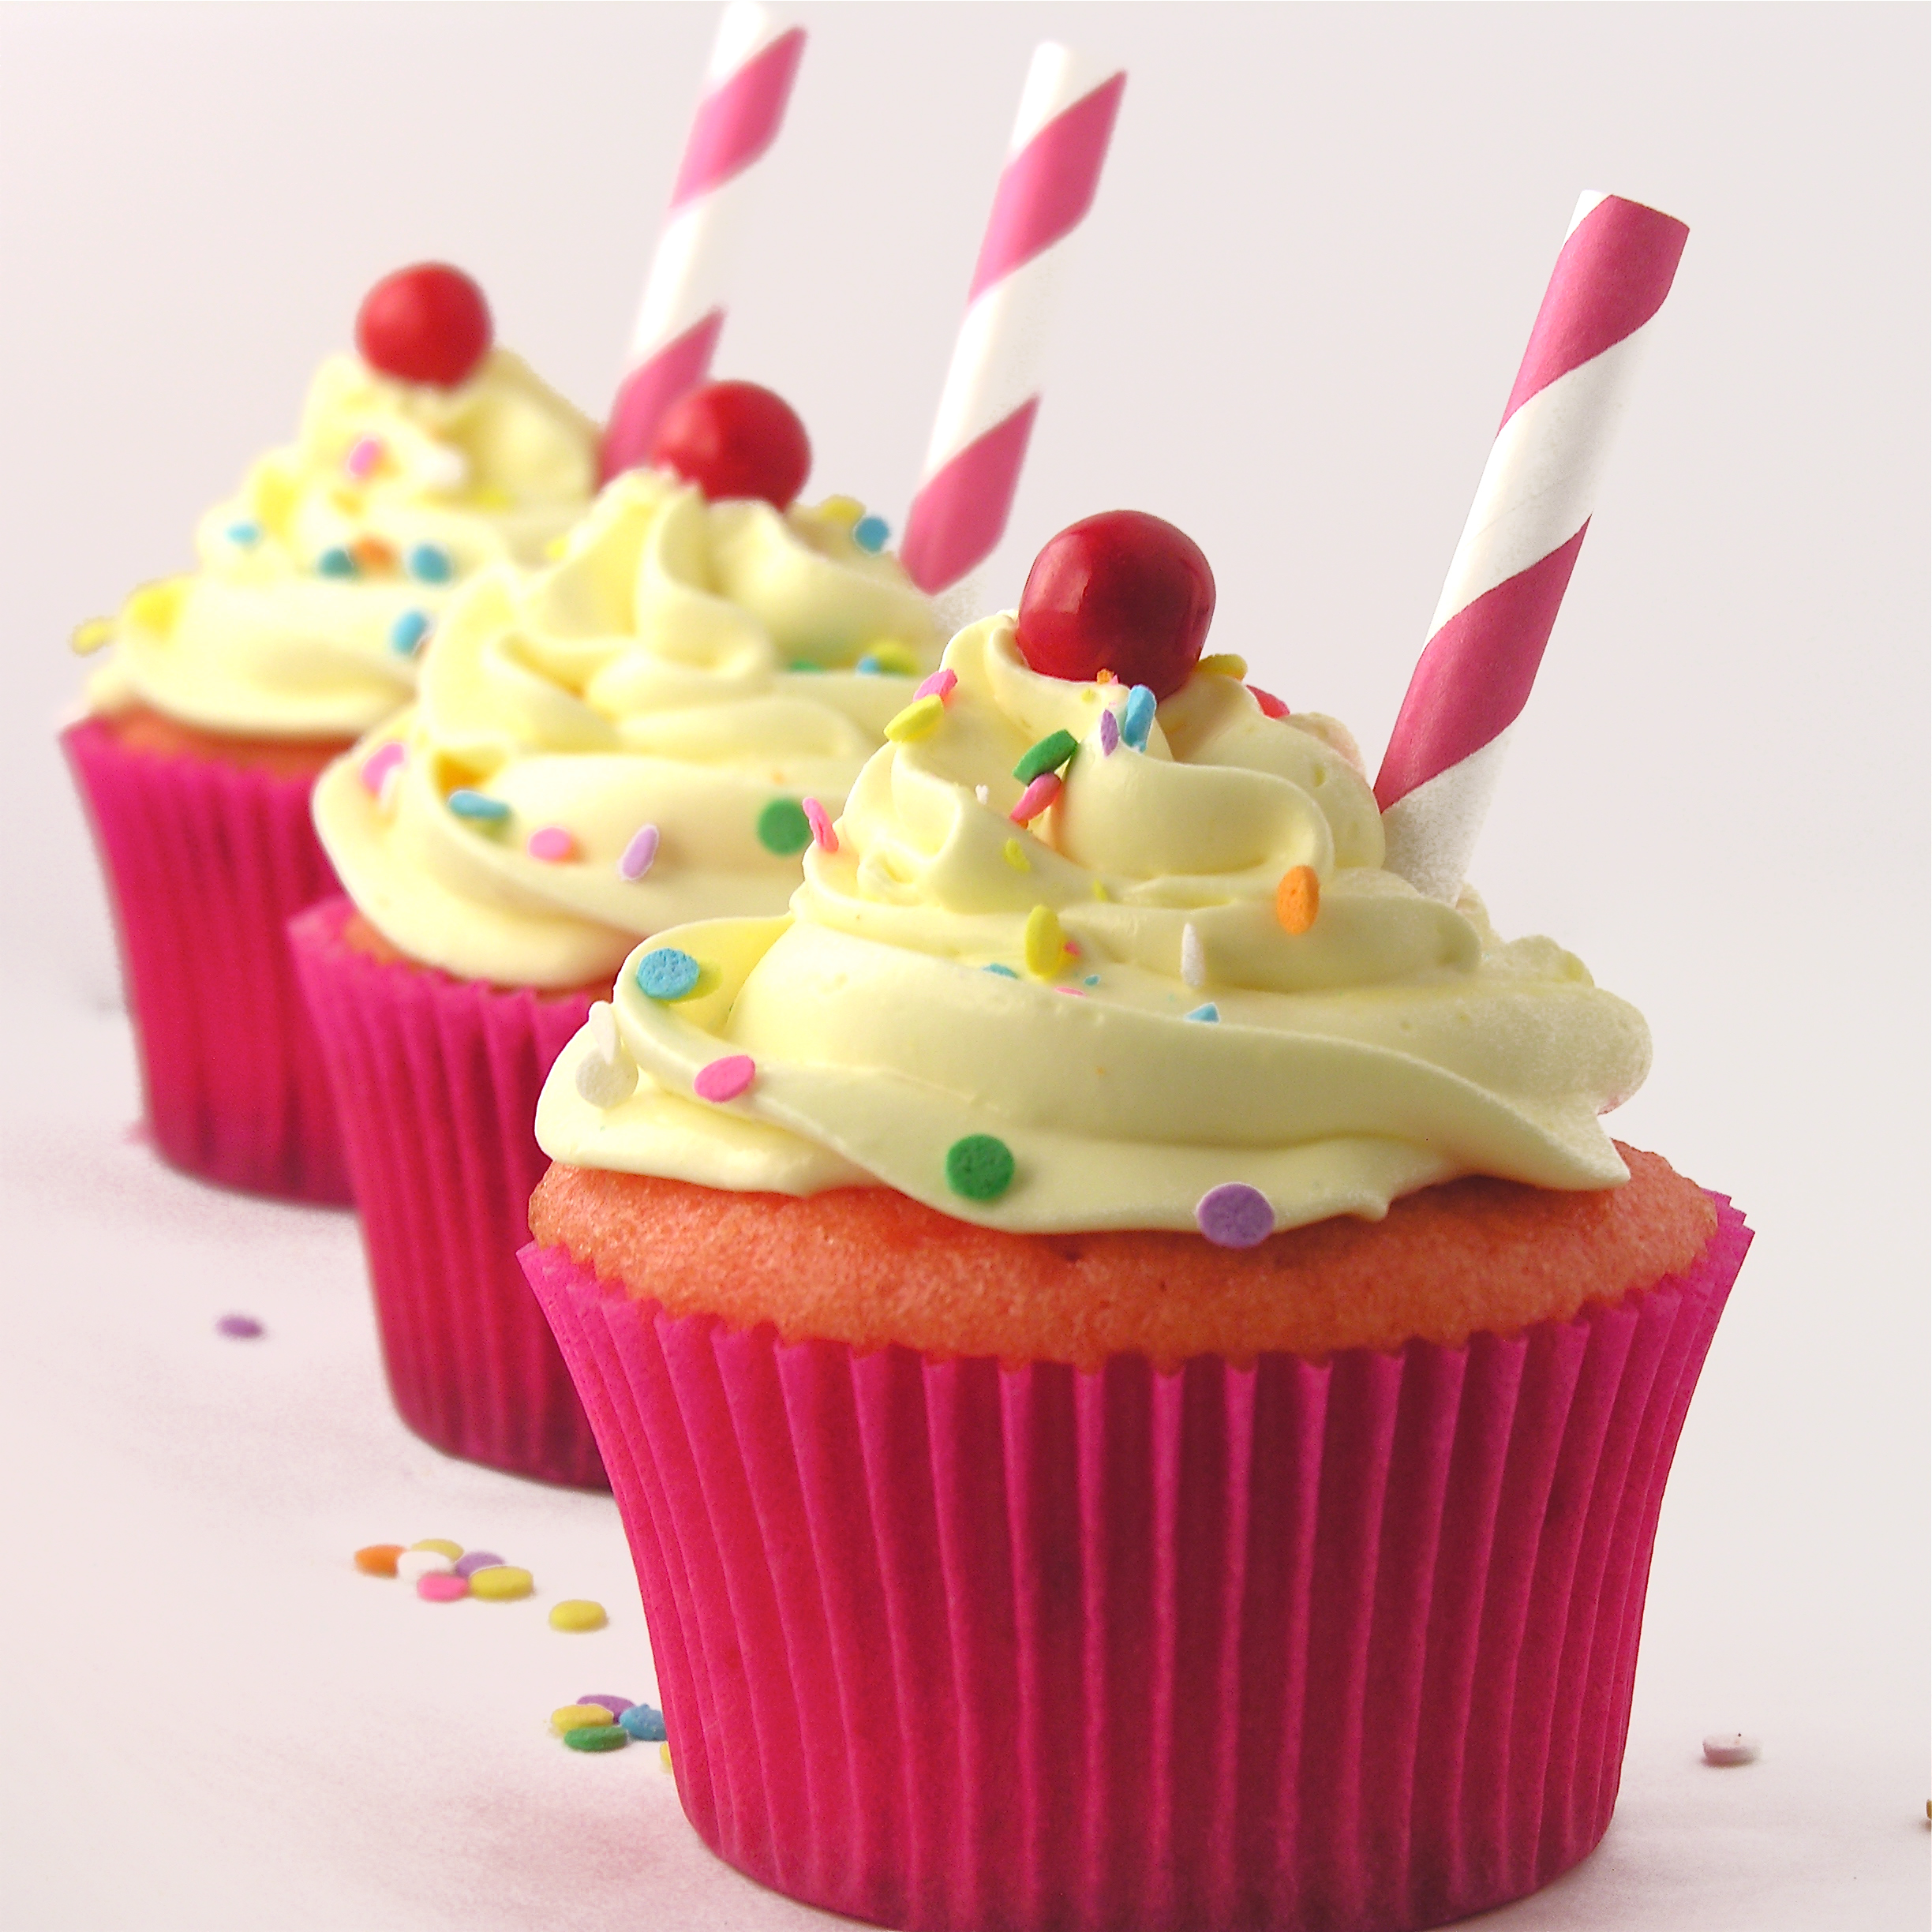 Images of cupcakes